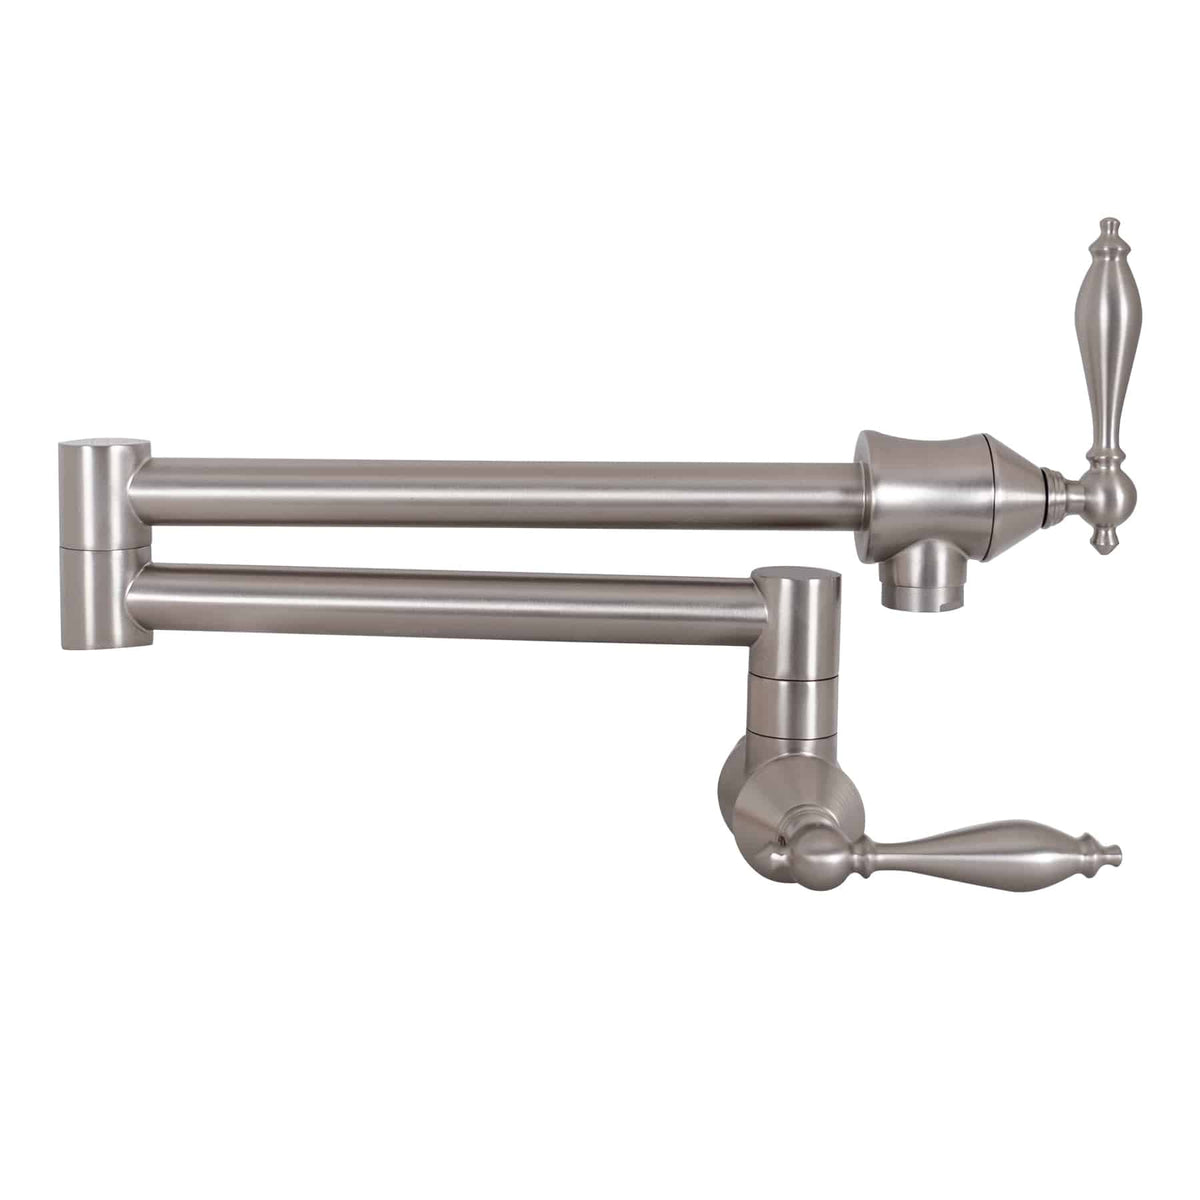 Fobest Wall Mount Two Handles Brushed Nickel Pot Filler Faucet